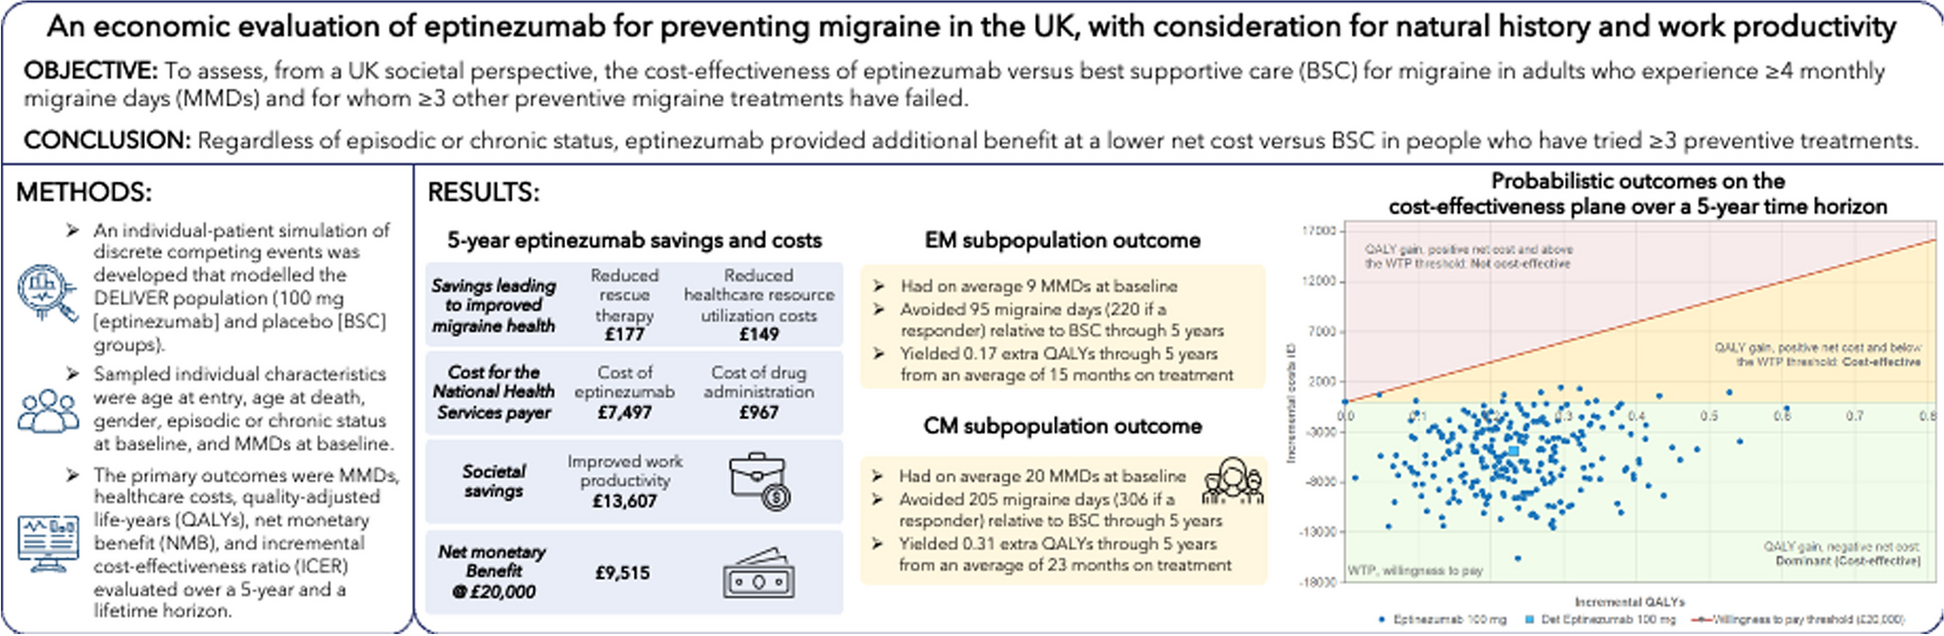 An economic evaluation of eptinezumab for the preventive treatment of migraine in the UK, with consideration for natural history and work productivity